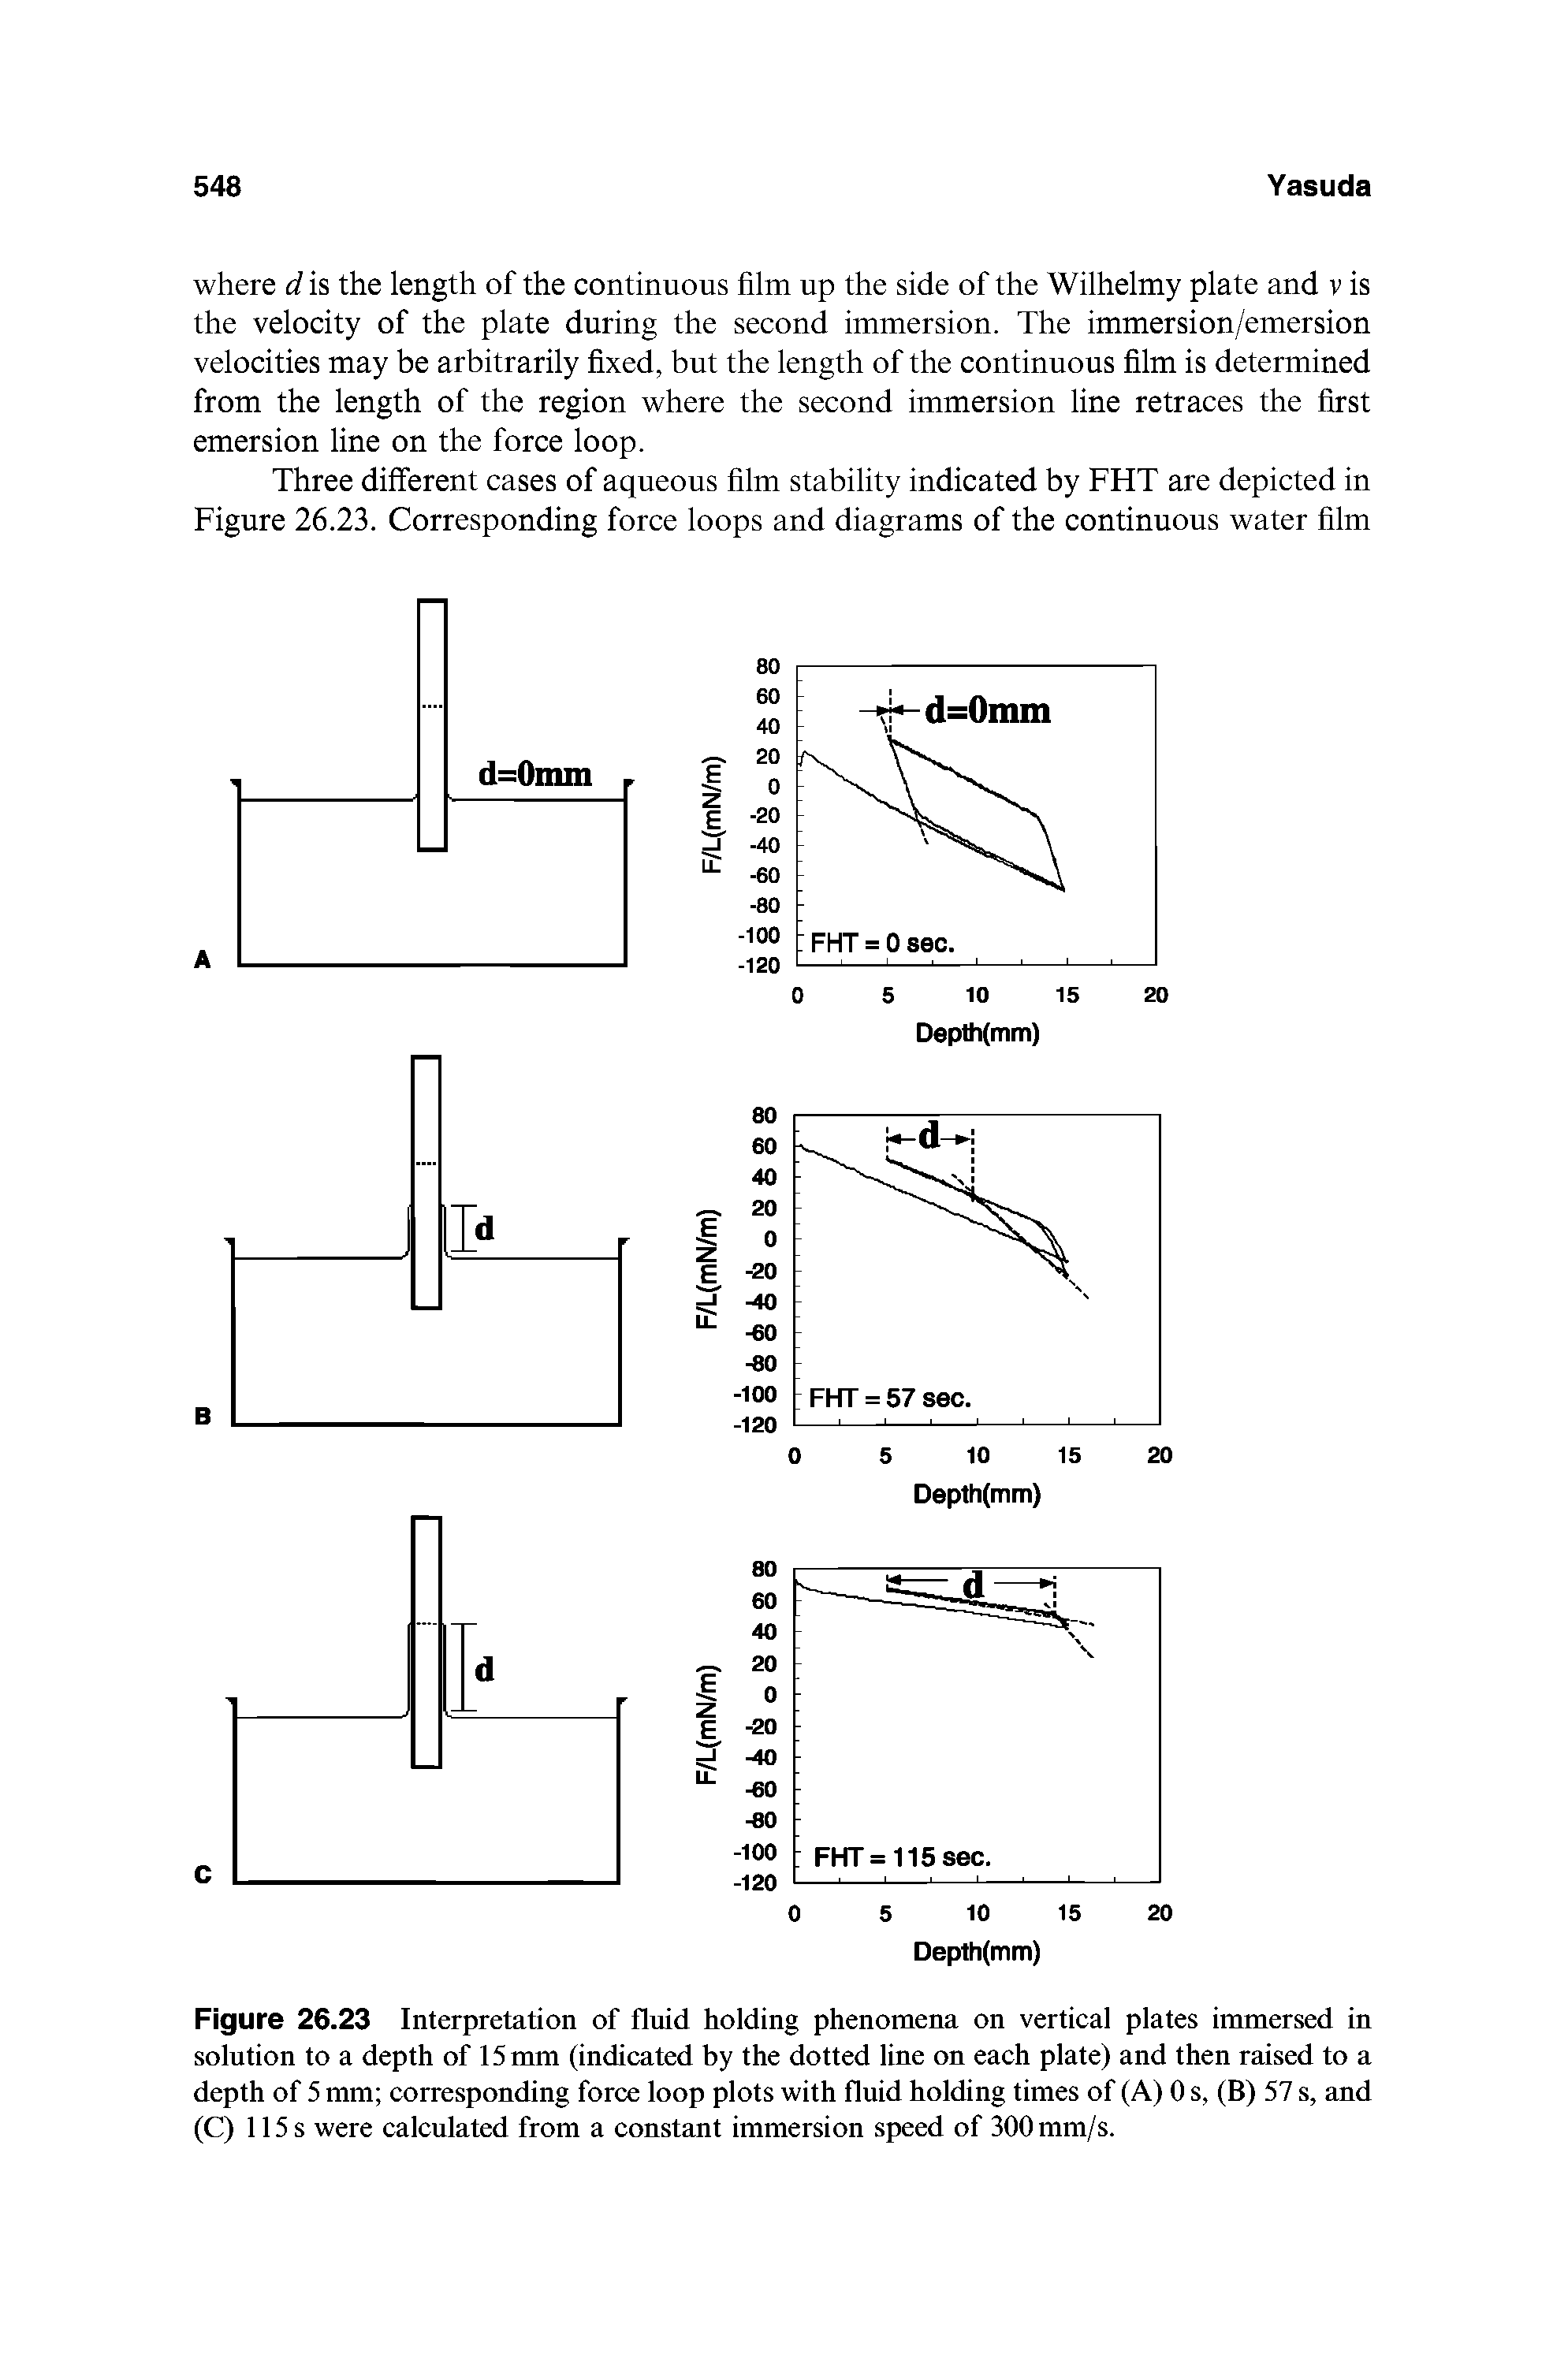 Figure 26.23 Interpretation of fluid holding phenomena on vertical plates immersed in solution to a depth of 15 mm (indicated by the dotted line on each plate) and then raised to a depth of 5 mm corresponding force loop plots with fluid holding times of (A) 0 s, (B) 57 s, and (C) 115s were calculated from a constant immersion speed of 300 mm/s.